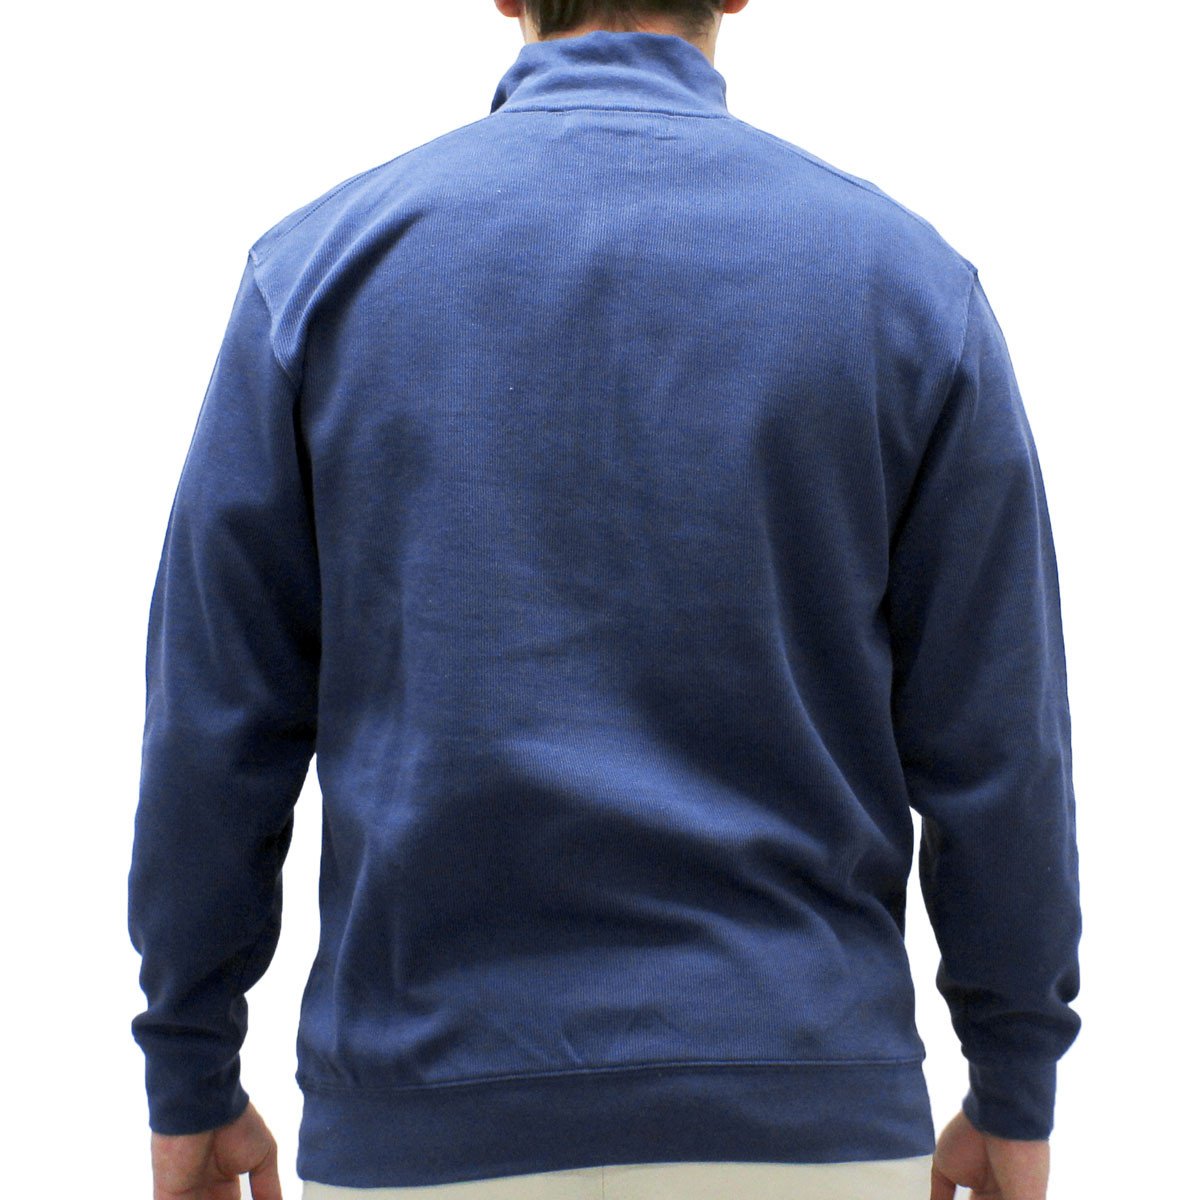 Biscayne Bay L/S Solid Rib Knit Sweater Big and Tall - Blue 7200-605BT - theflagshirt